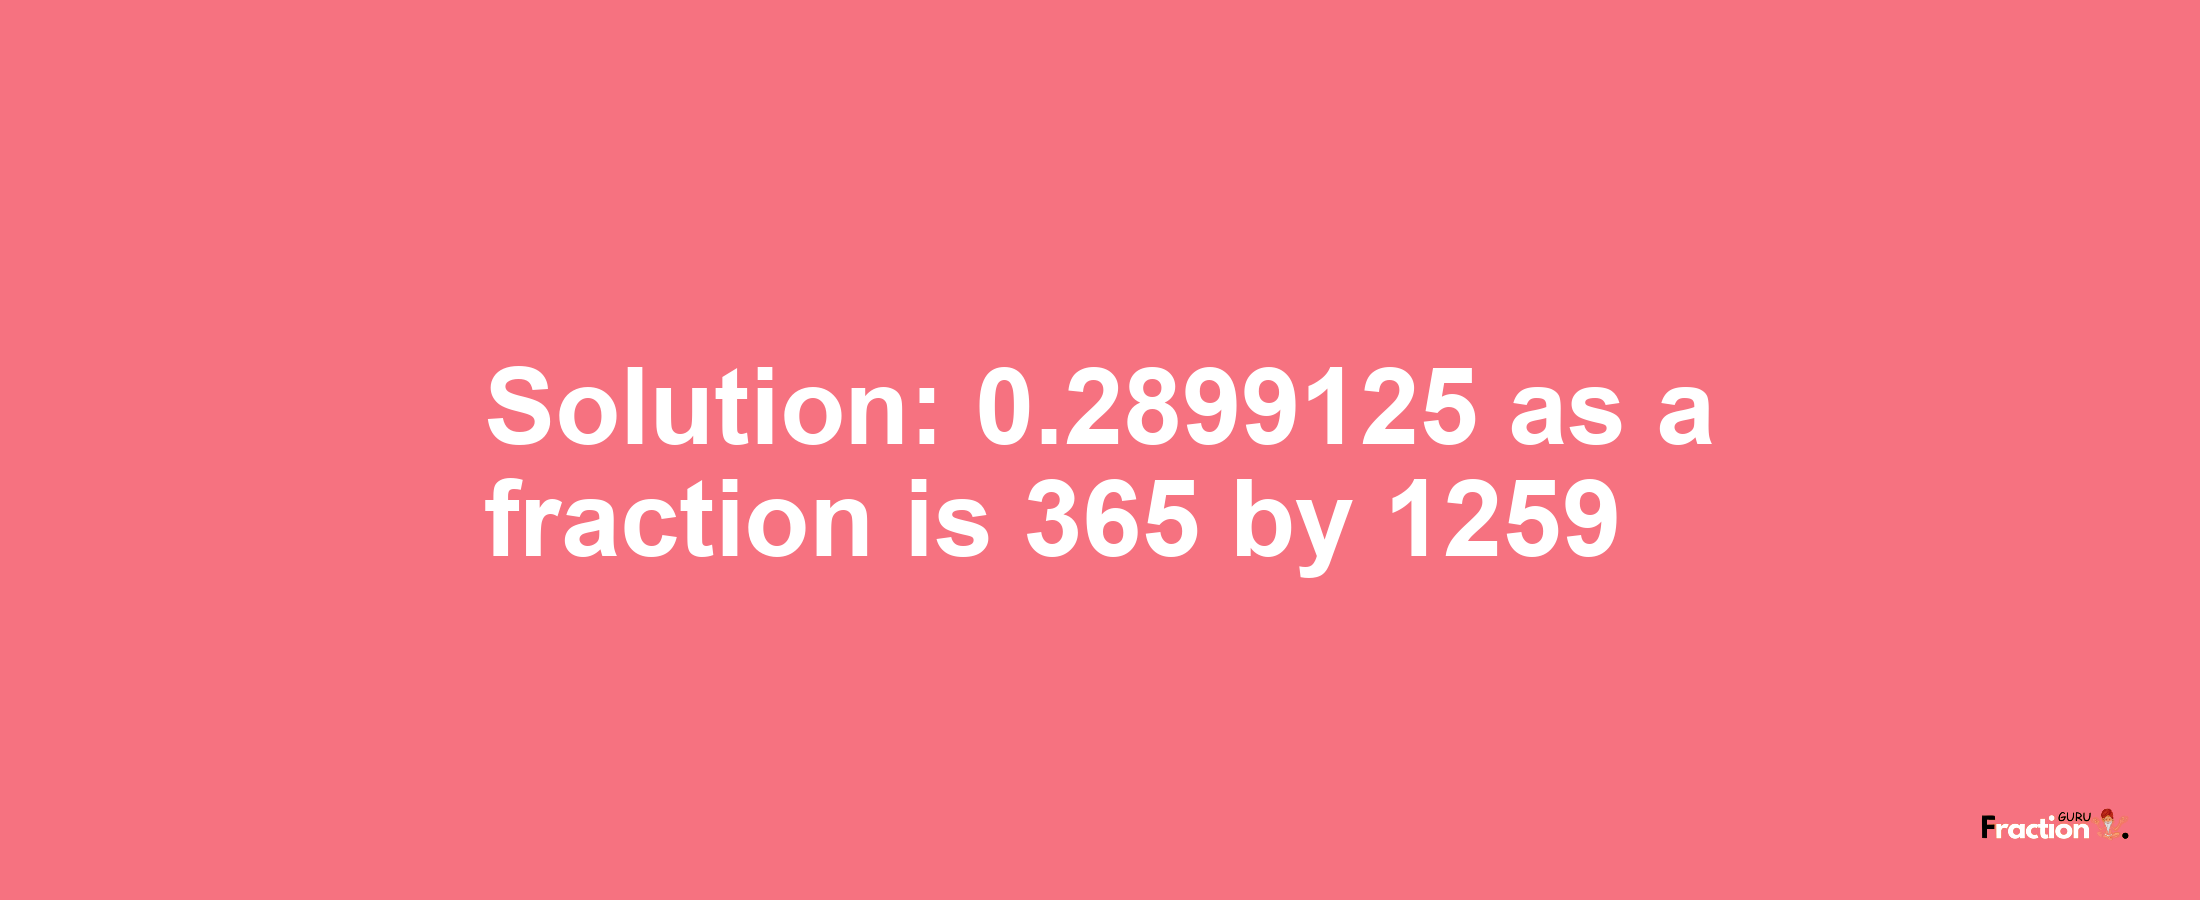 Solution:0.2899125 as a fraction is 365/1259